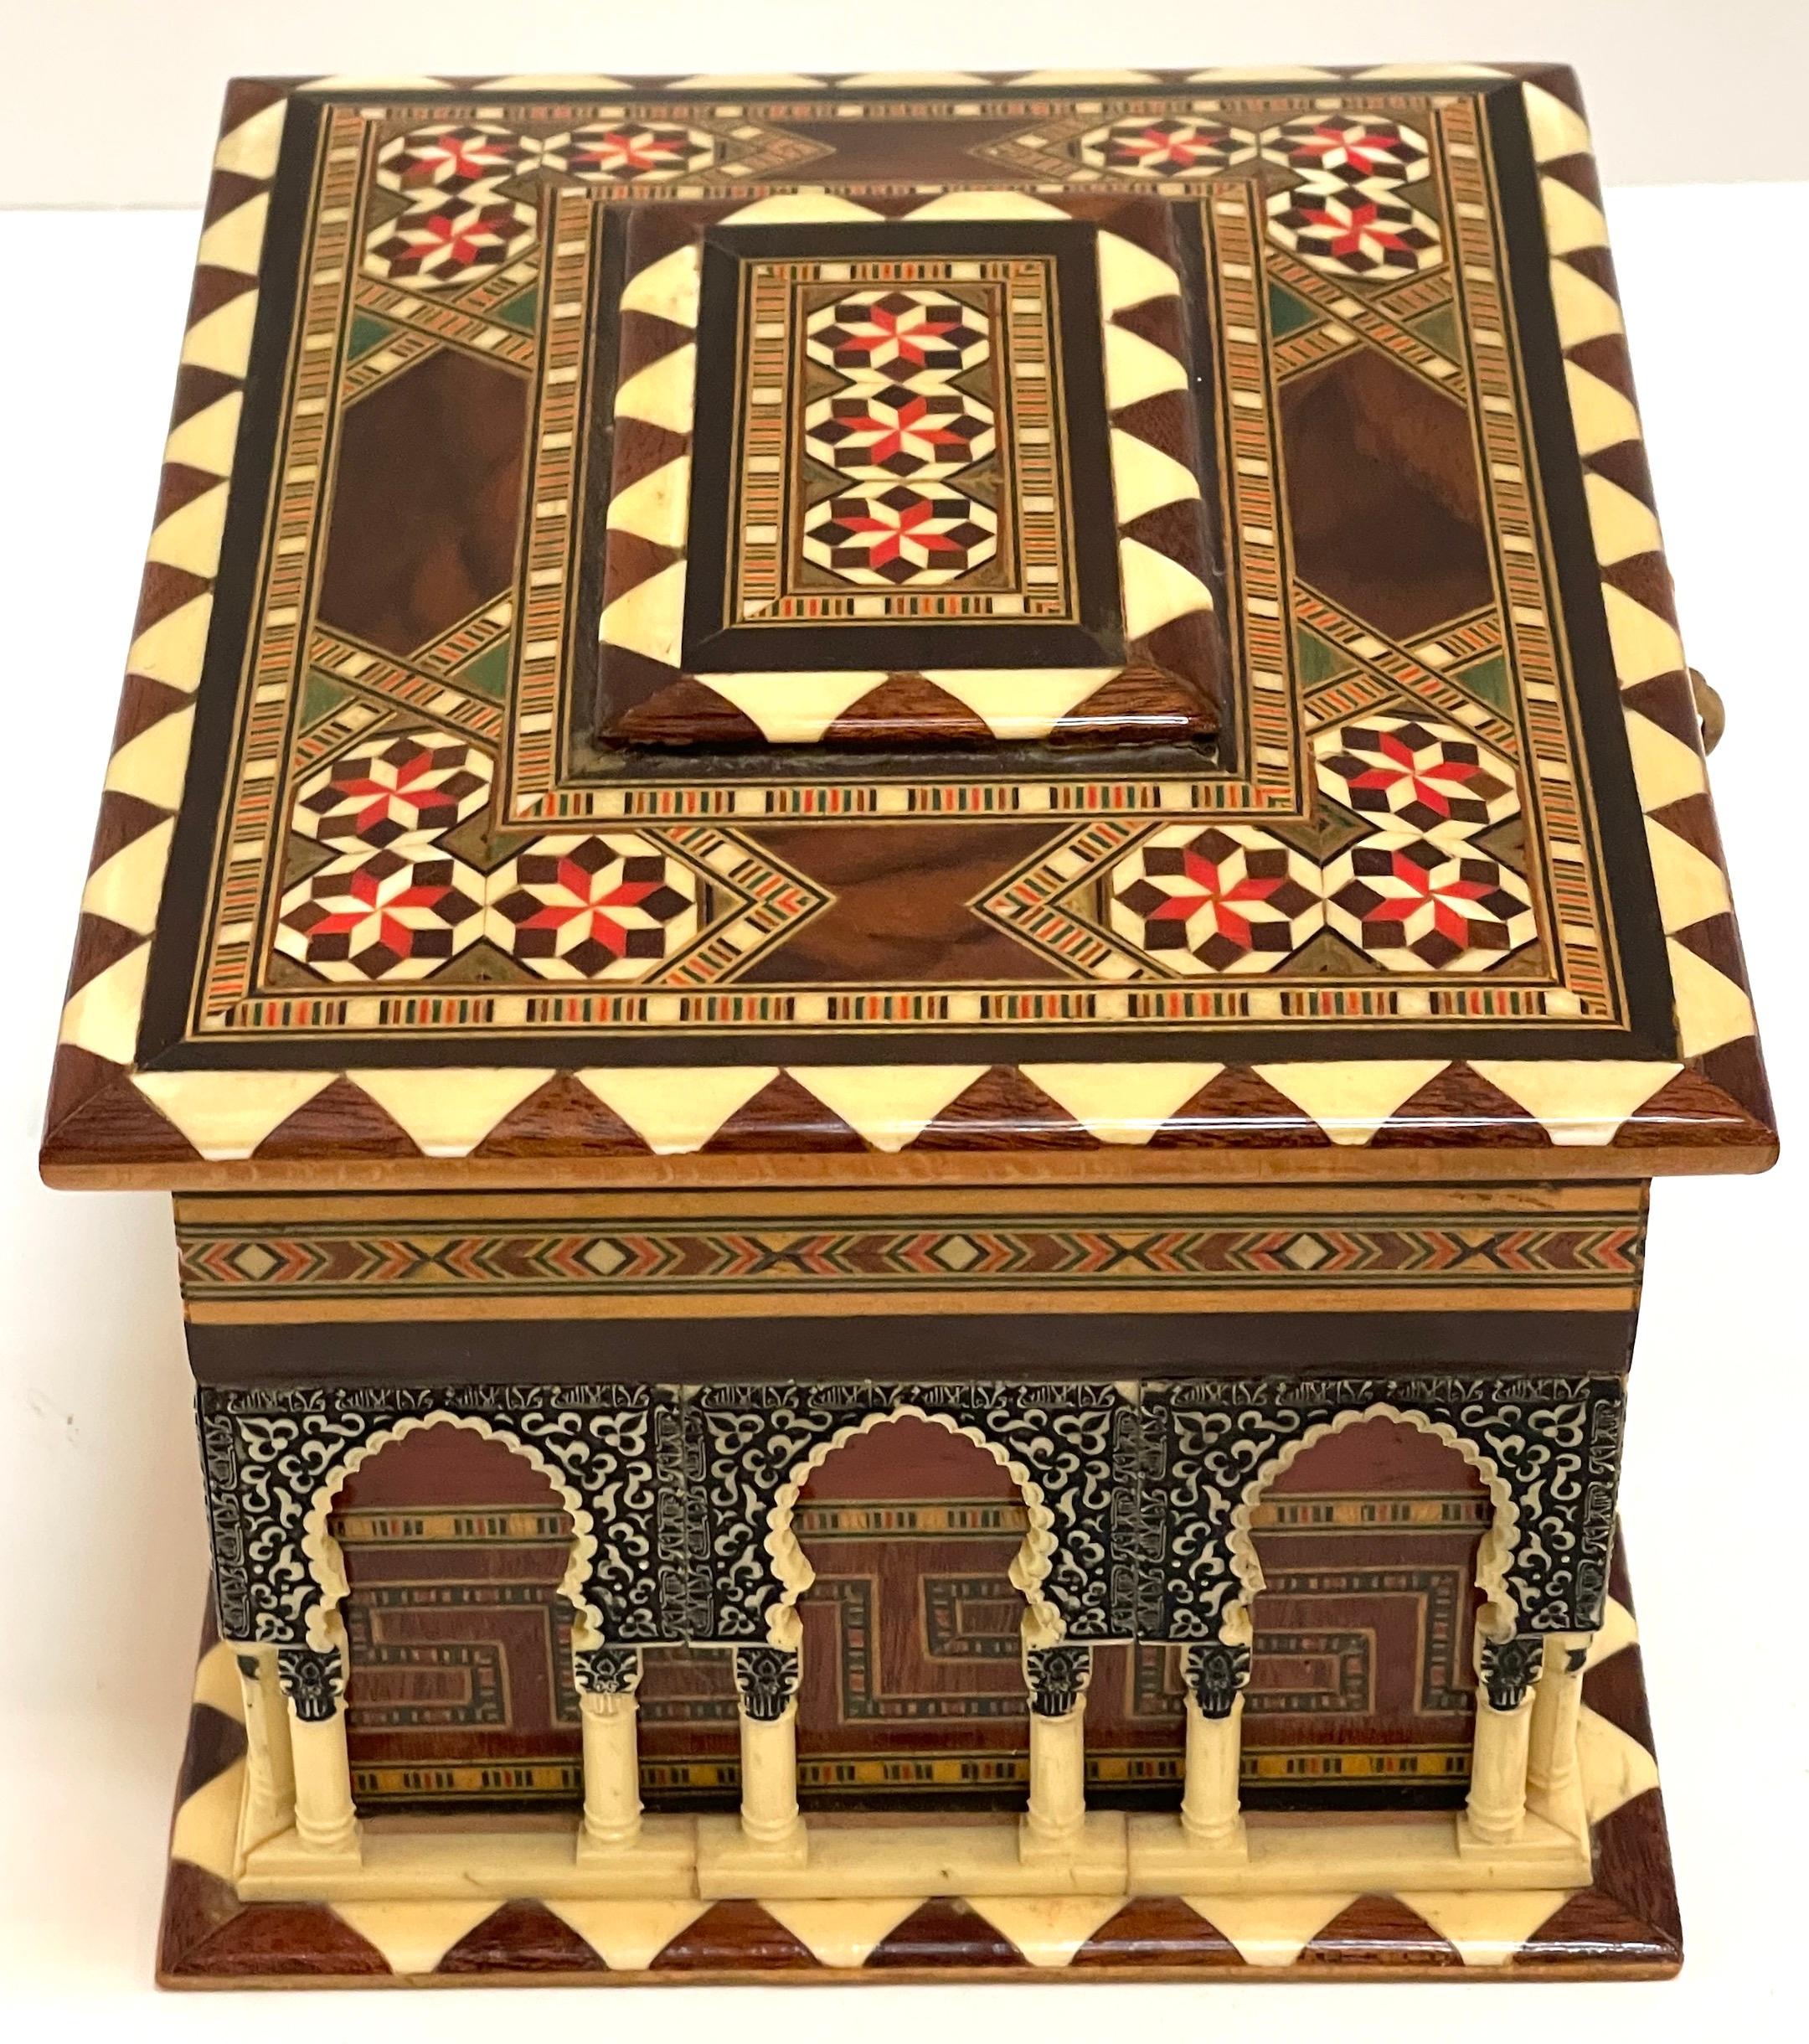 Spanish Architectural Model Box of the Alhambra Palace, with Key For Sale